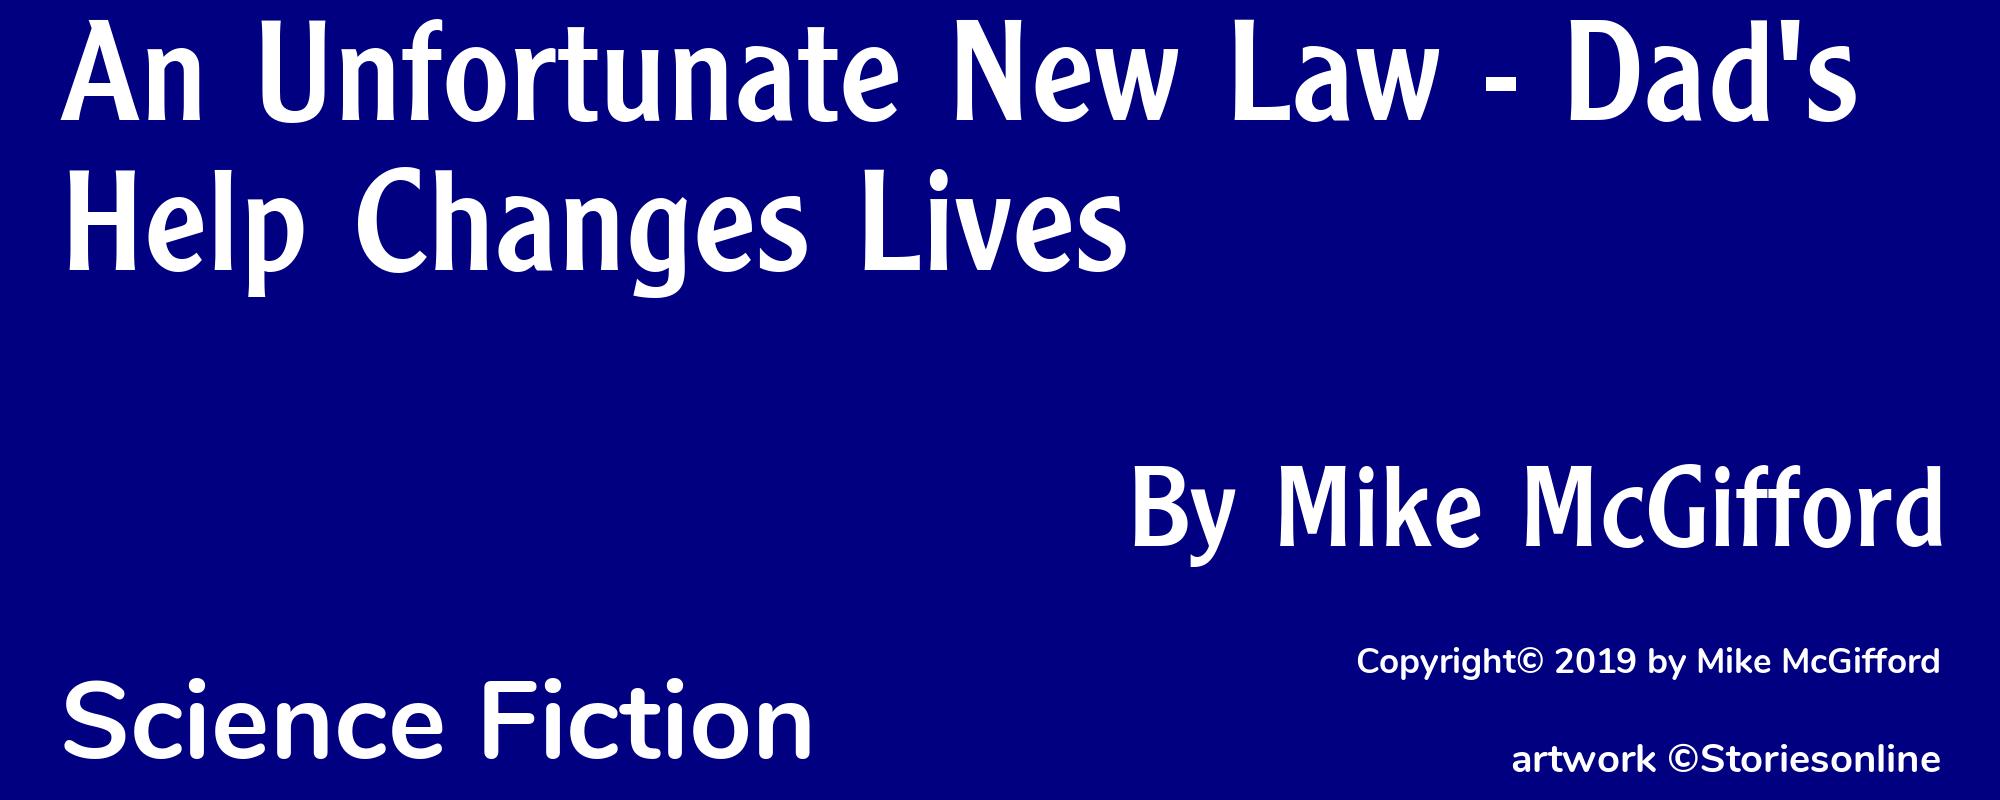 An Unfortunate New Law - Dad's Help Changes Lives - Cover